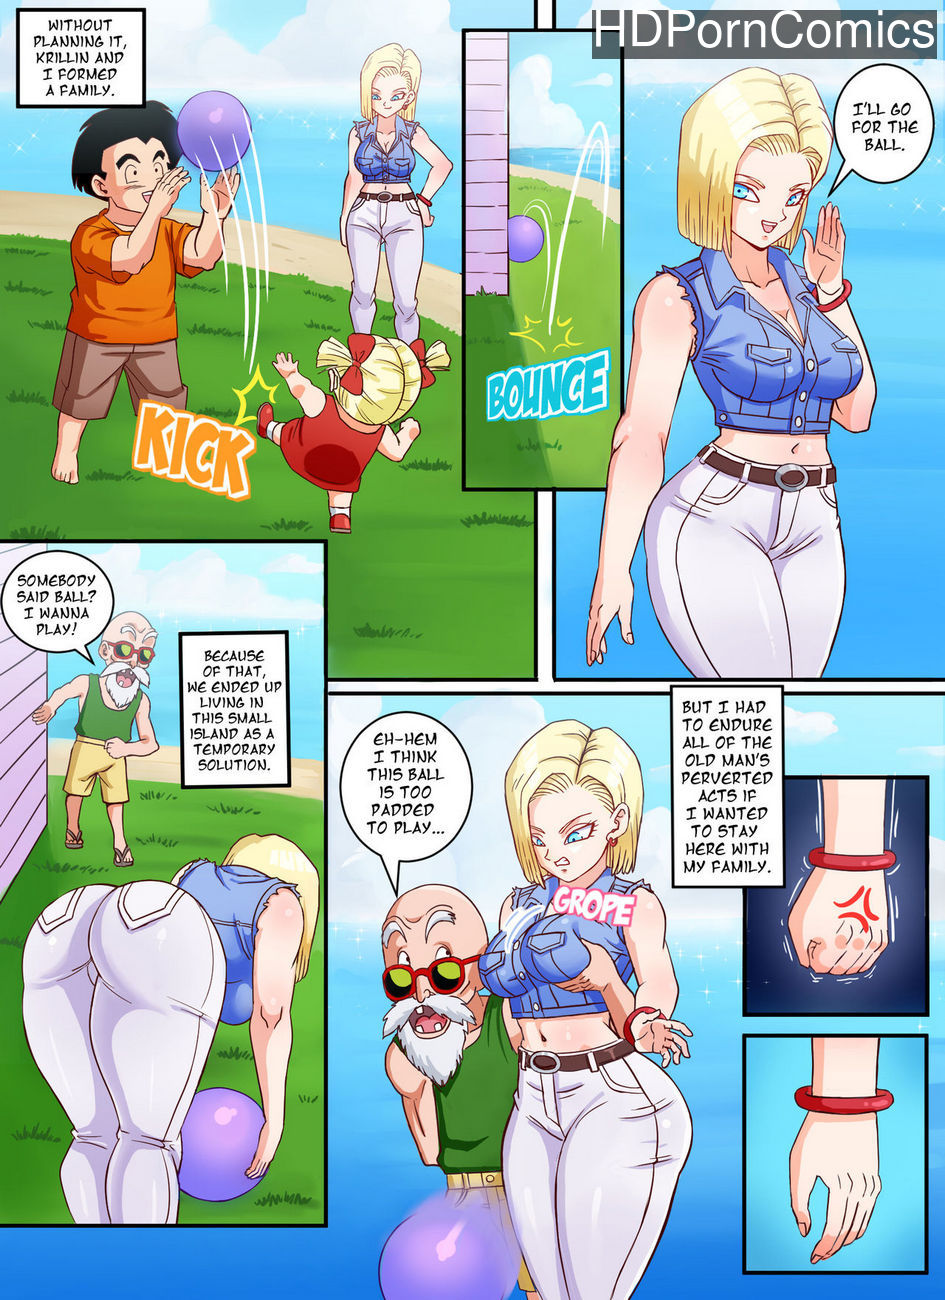 Android 18 naked comics